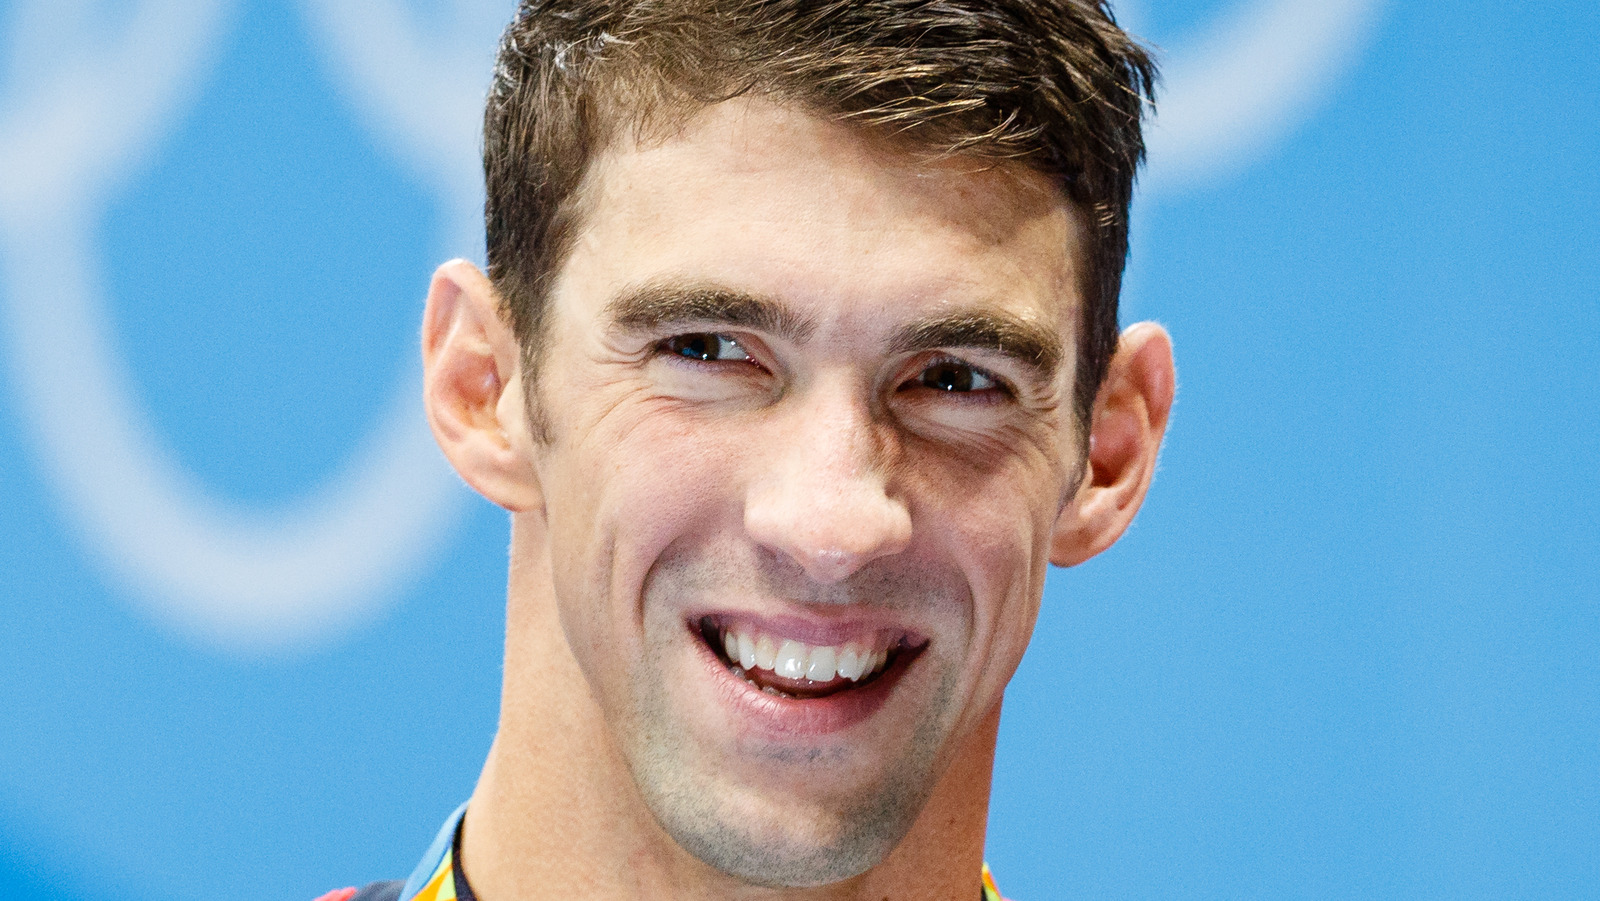 The Untold Truth Of Michael Phelps